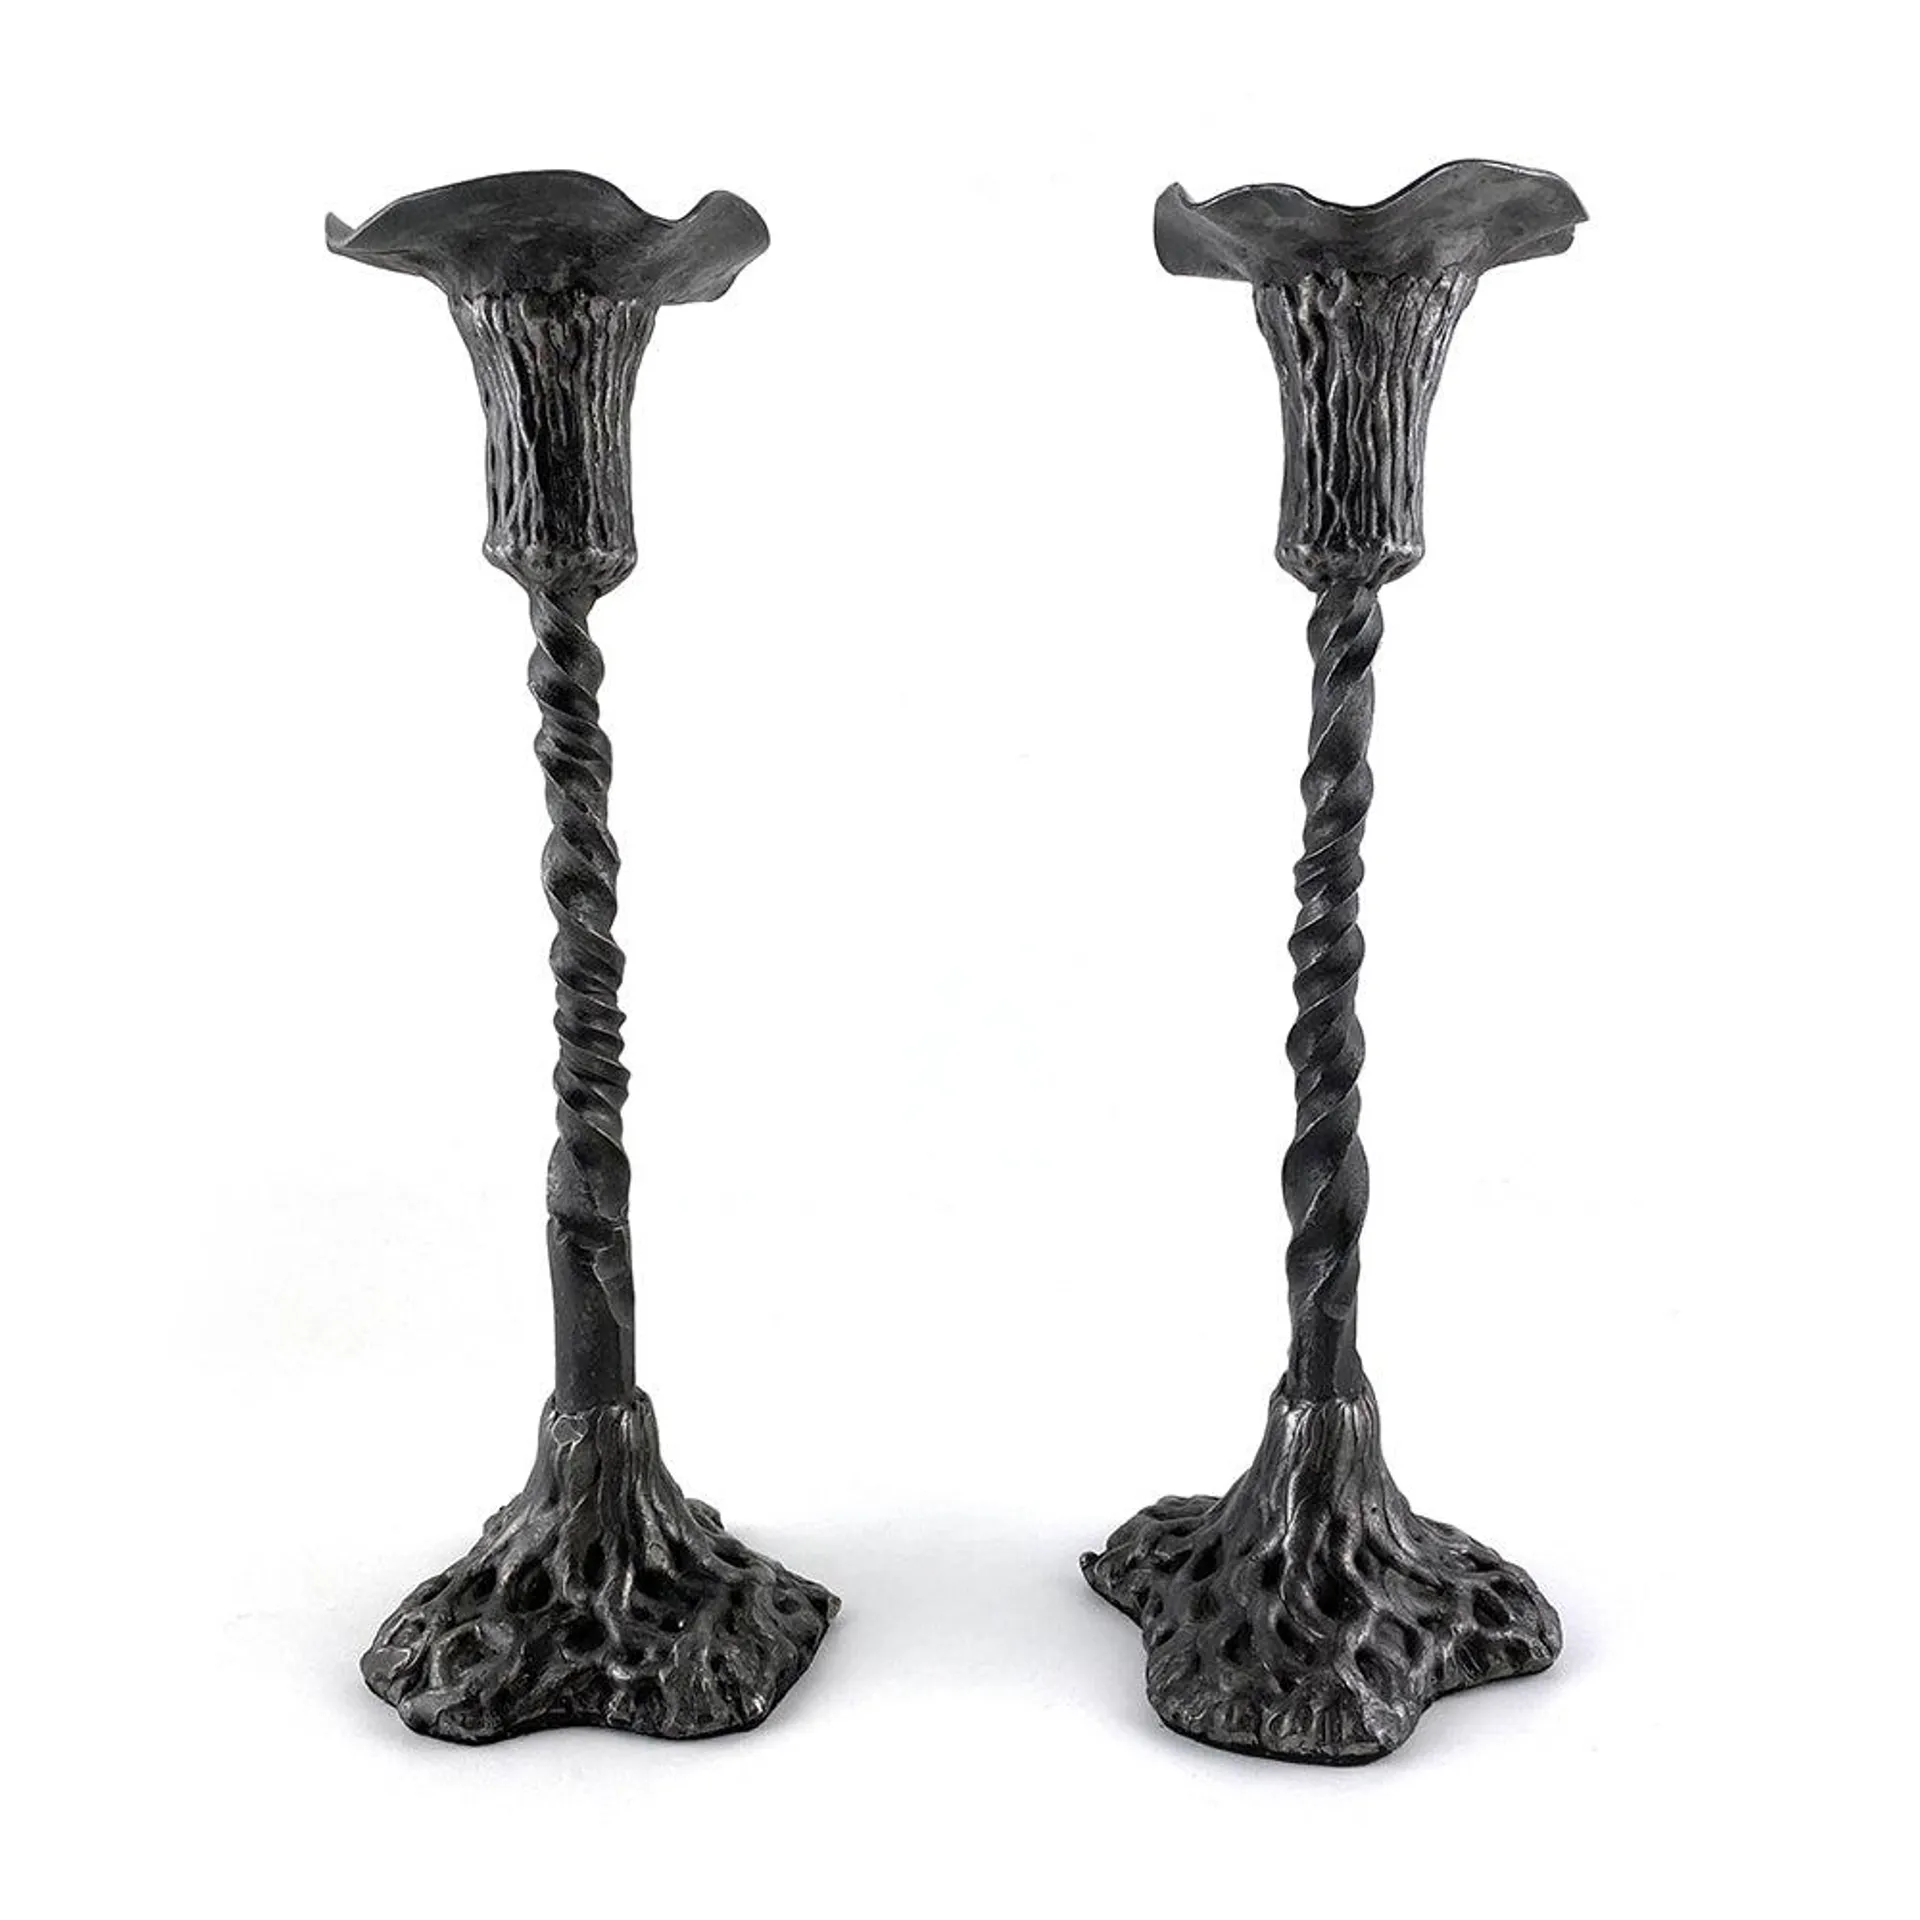 Pair of Tall Twisted Candlesticks